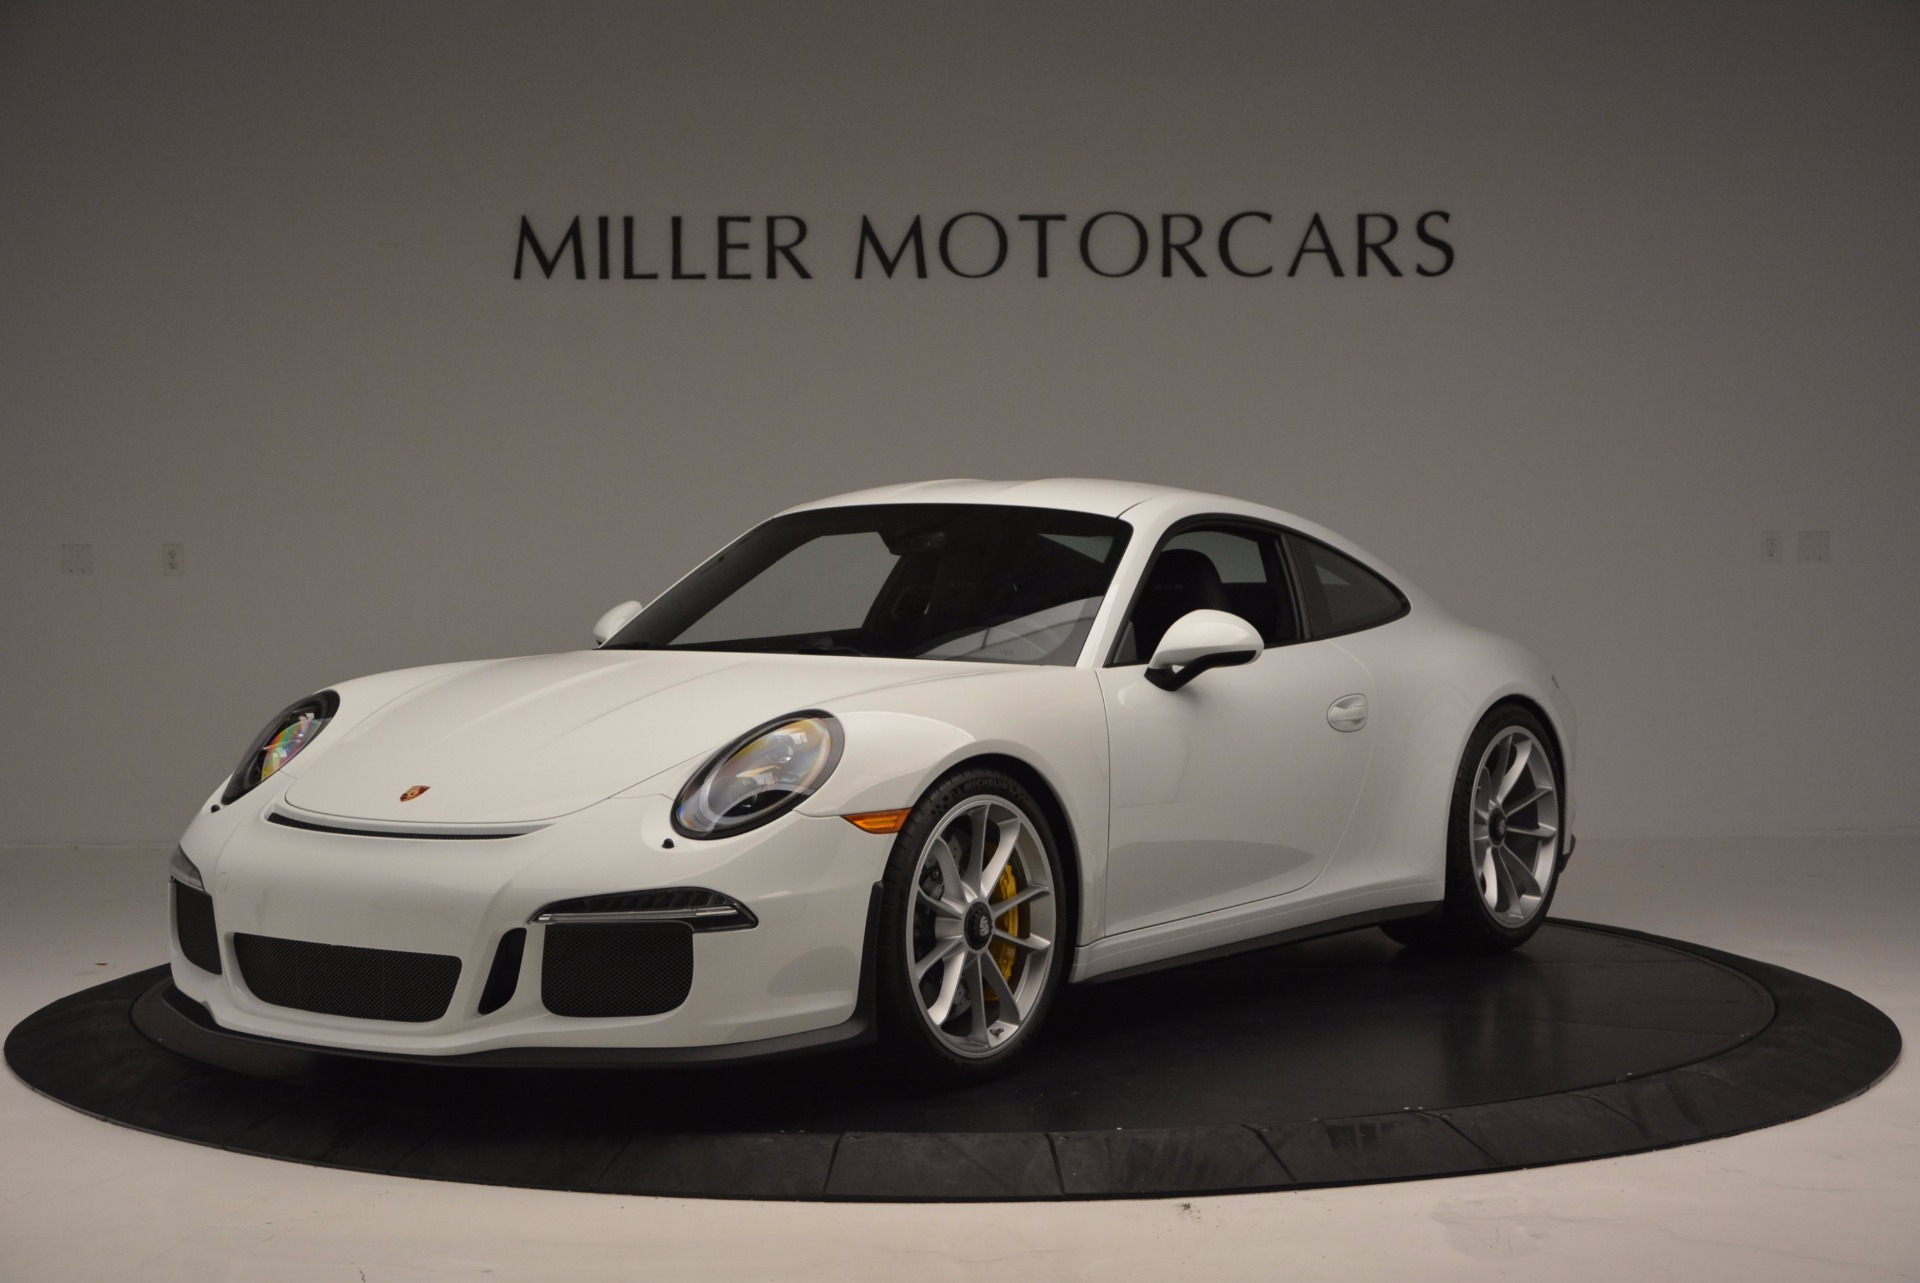 Used 2016 Porsche 911 R for sale Sold at Pagani of Greenwich in Greenwich CT 06830 1